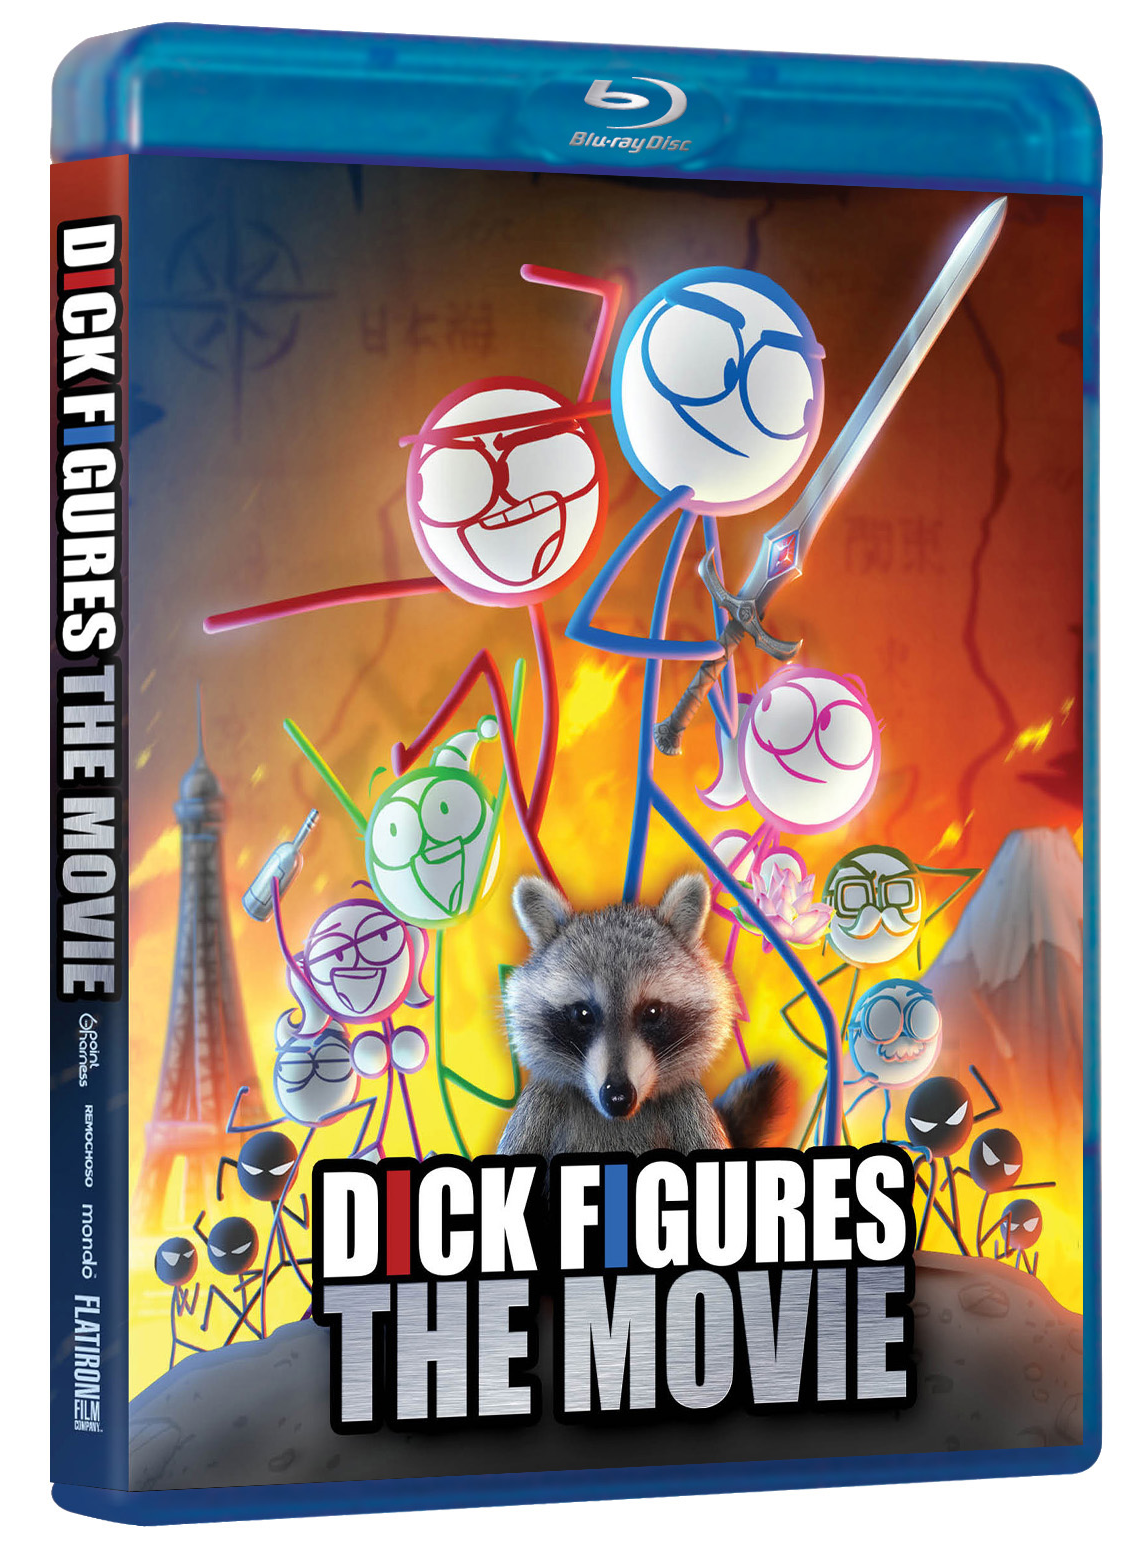 Dick Figures Movie Dvd.png - Dvd Movie, Transparent background PNG HD thumbnail